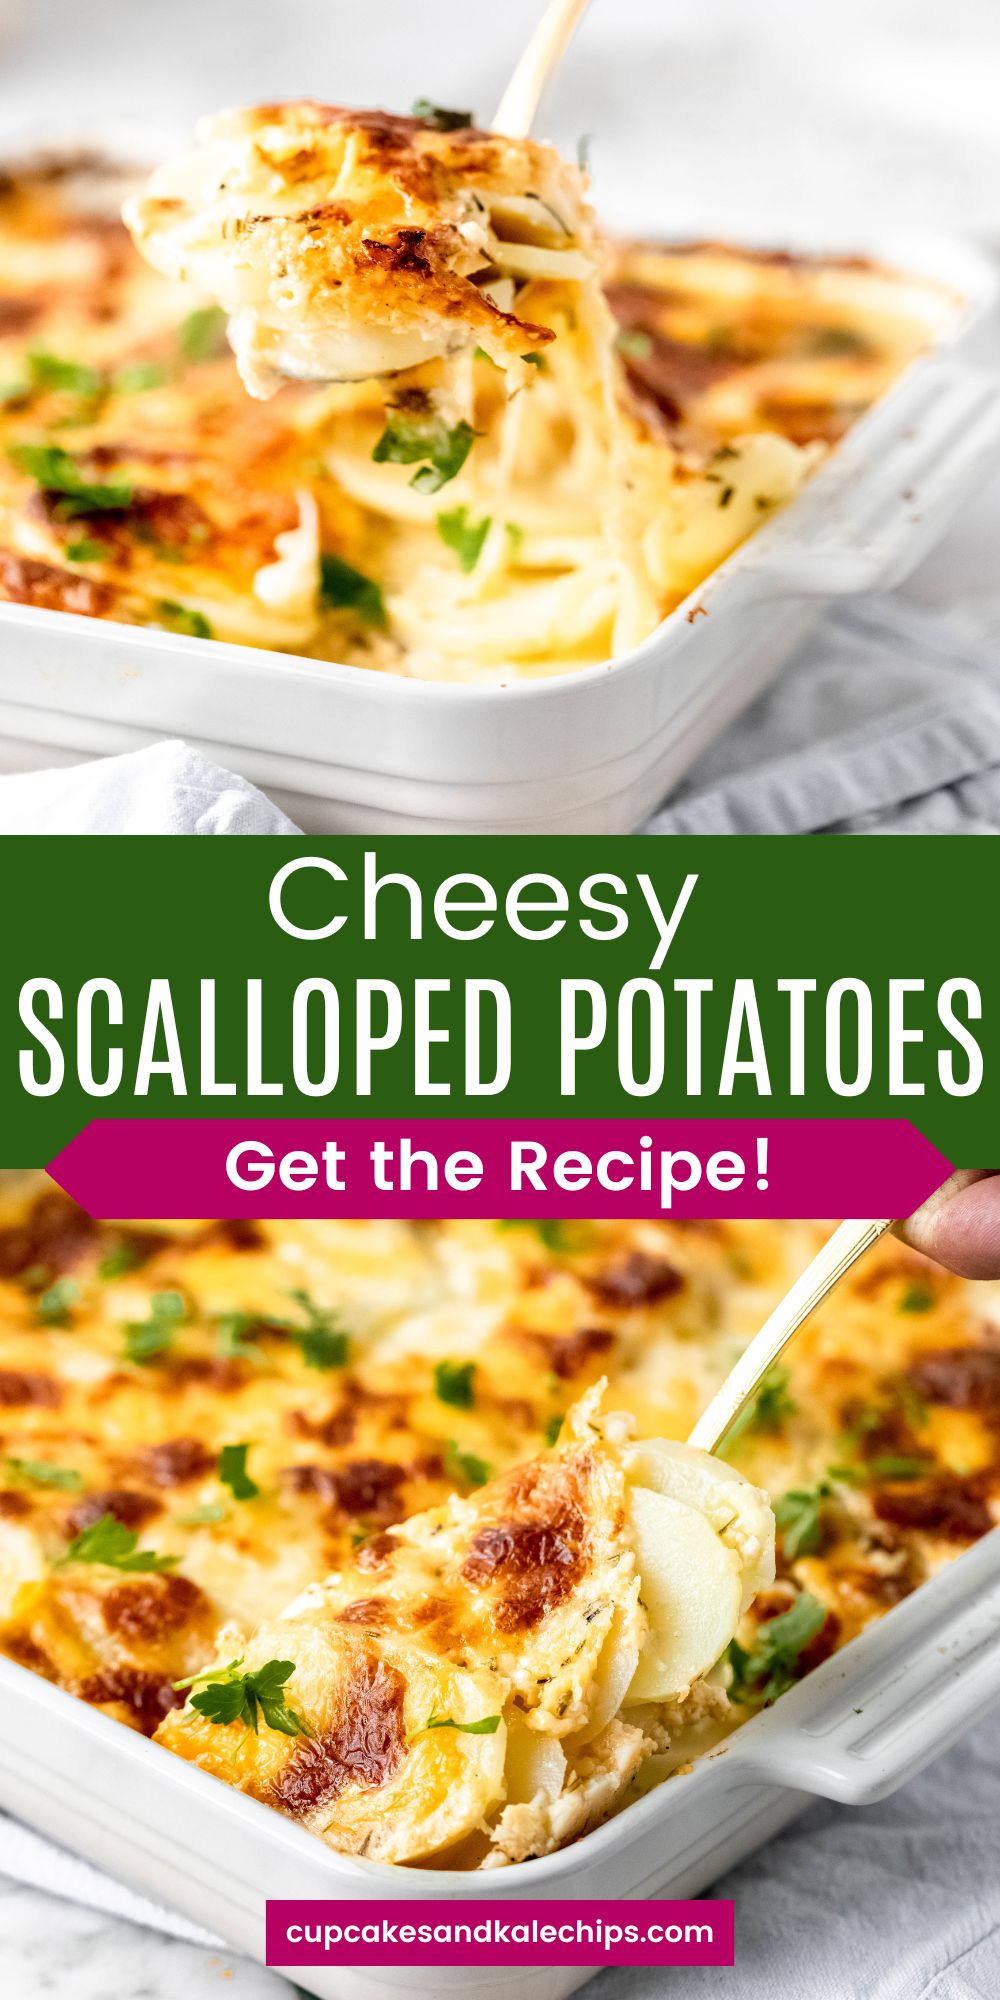 Cheesy Scalloped Potatoes | Cupcakes & Kale Chips